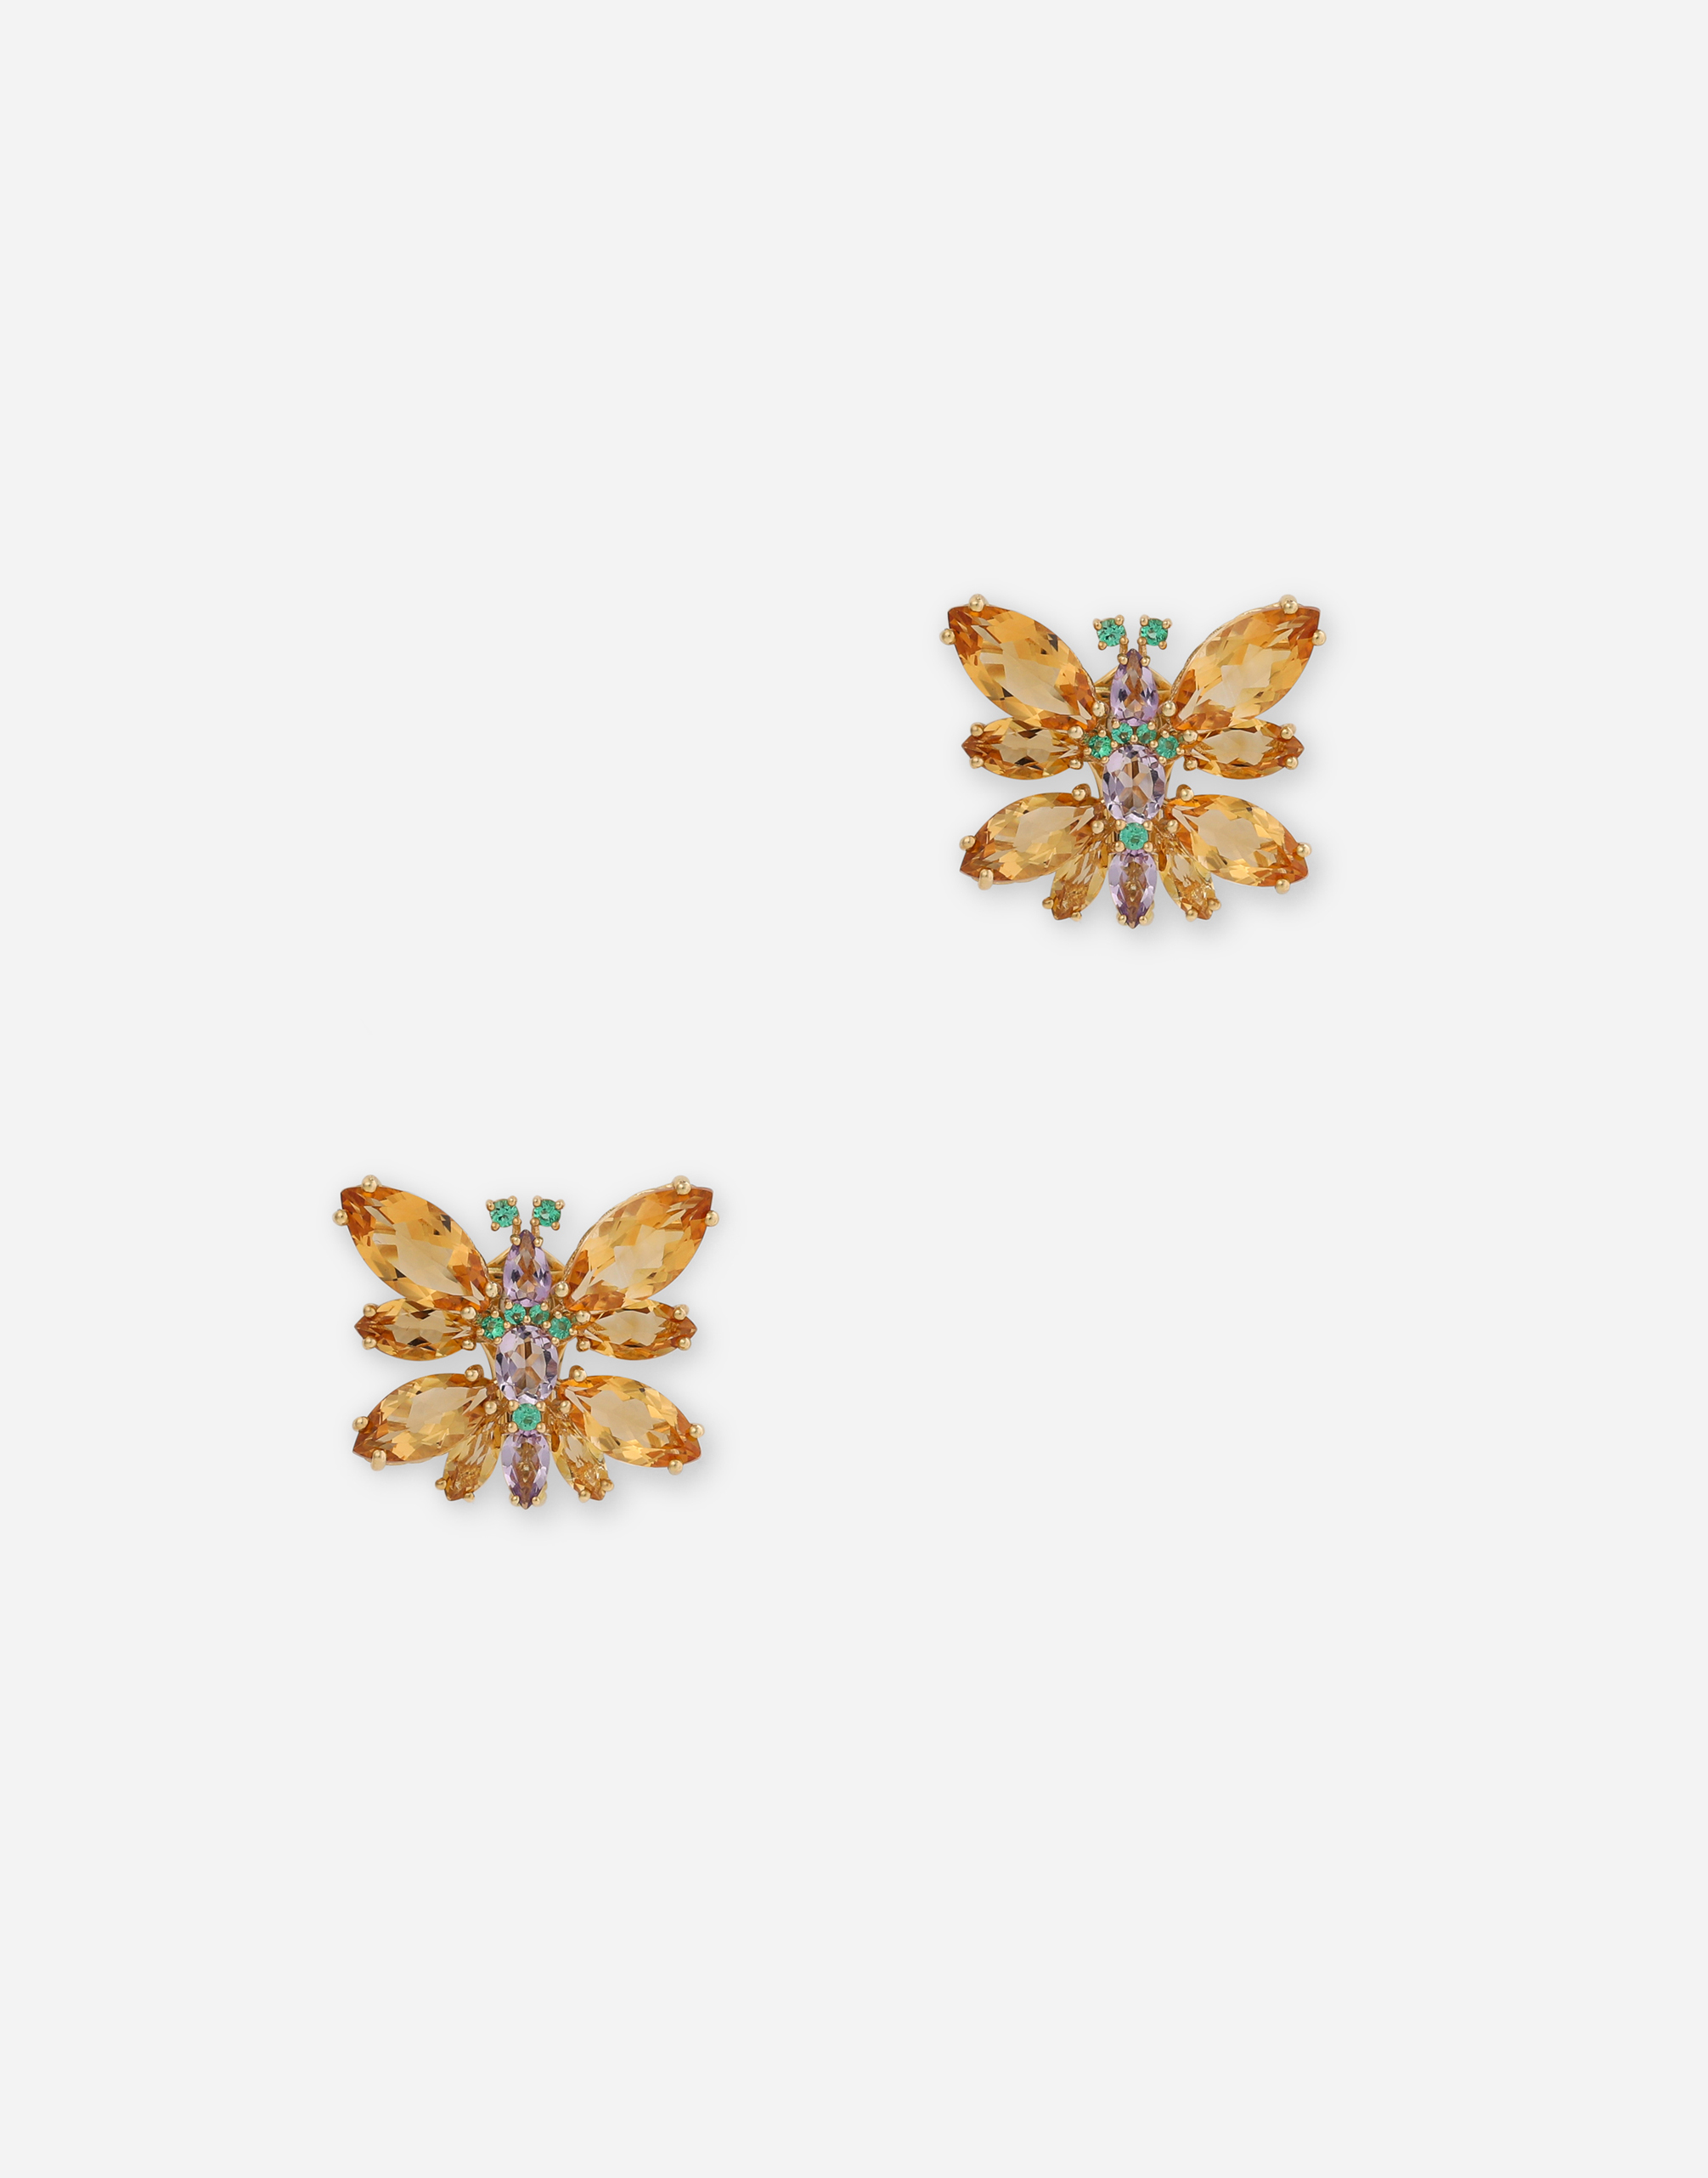 Dolce & Gabbana Spring Earrings In Yellow 18kt Gold With Citrine Butterflies Gold Female Onesize